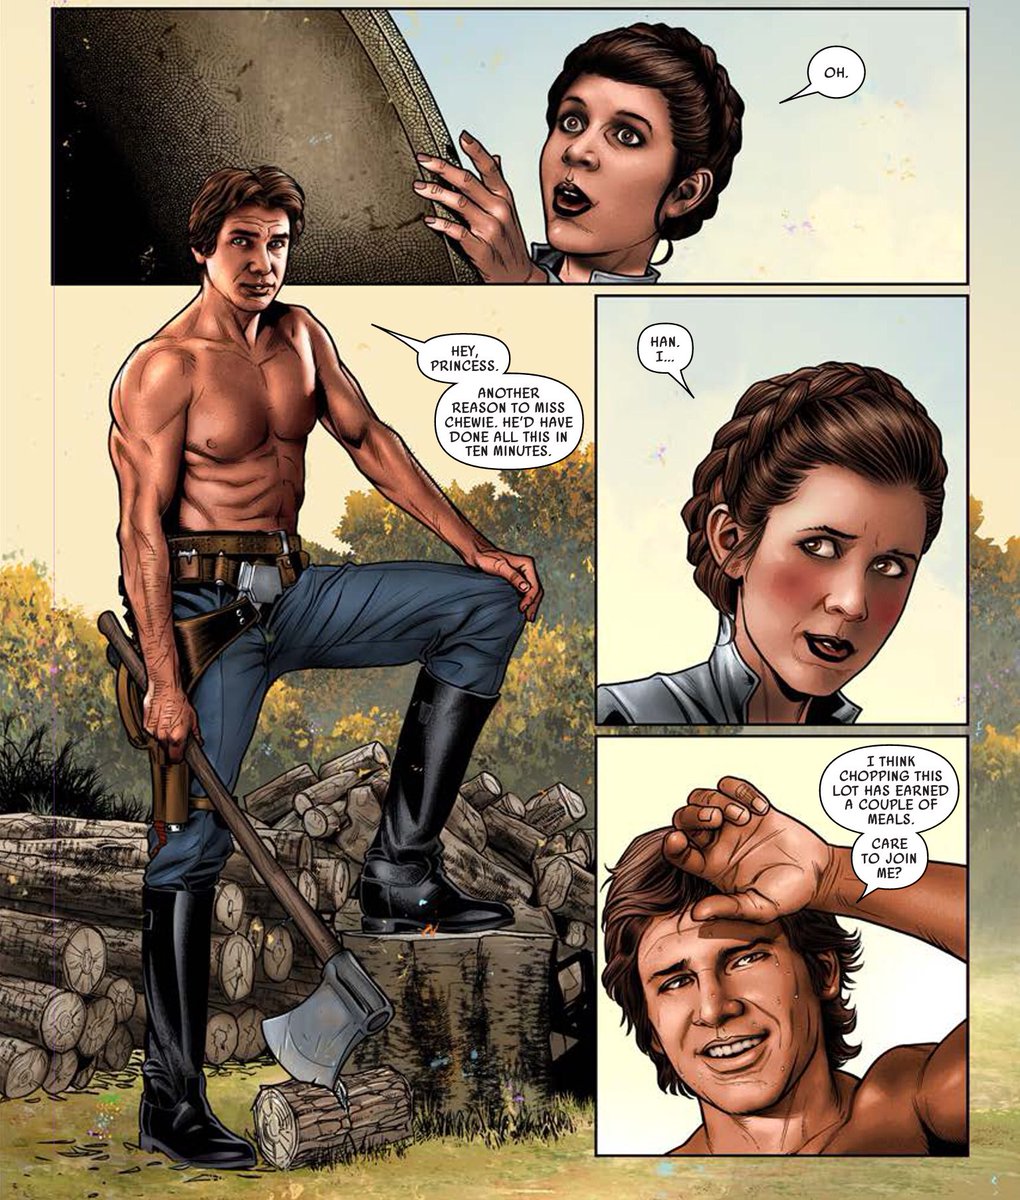 New canon comics, this reminds me of a scene from TLJ r/StarWars